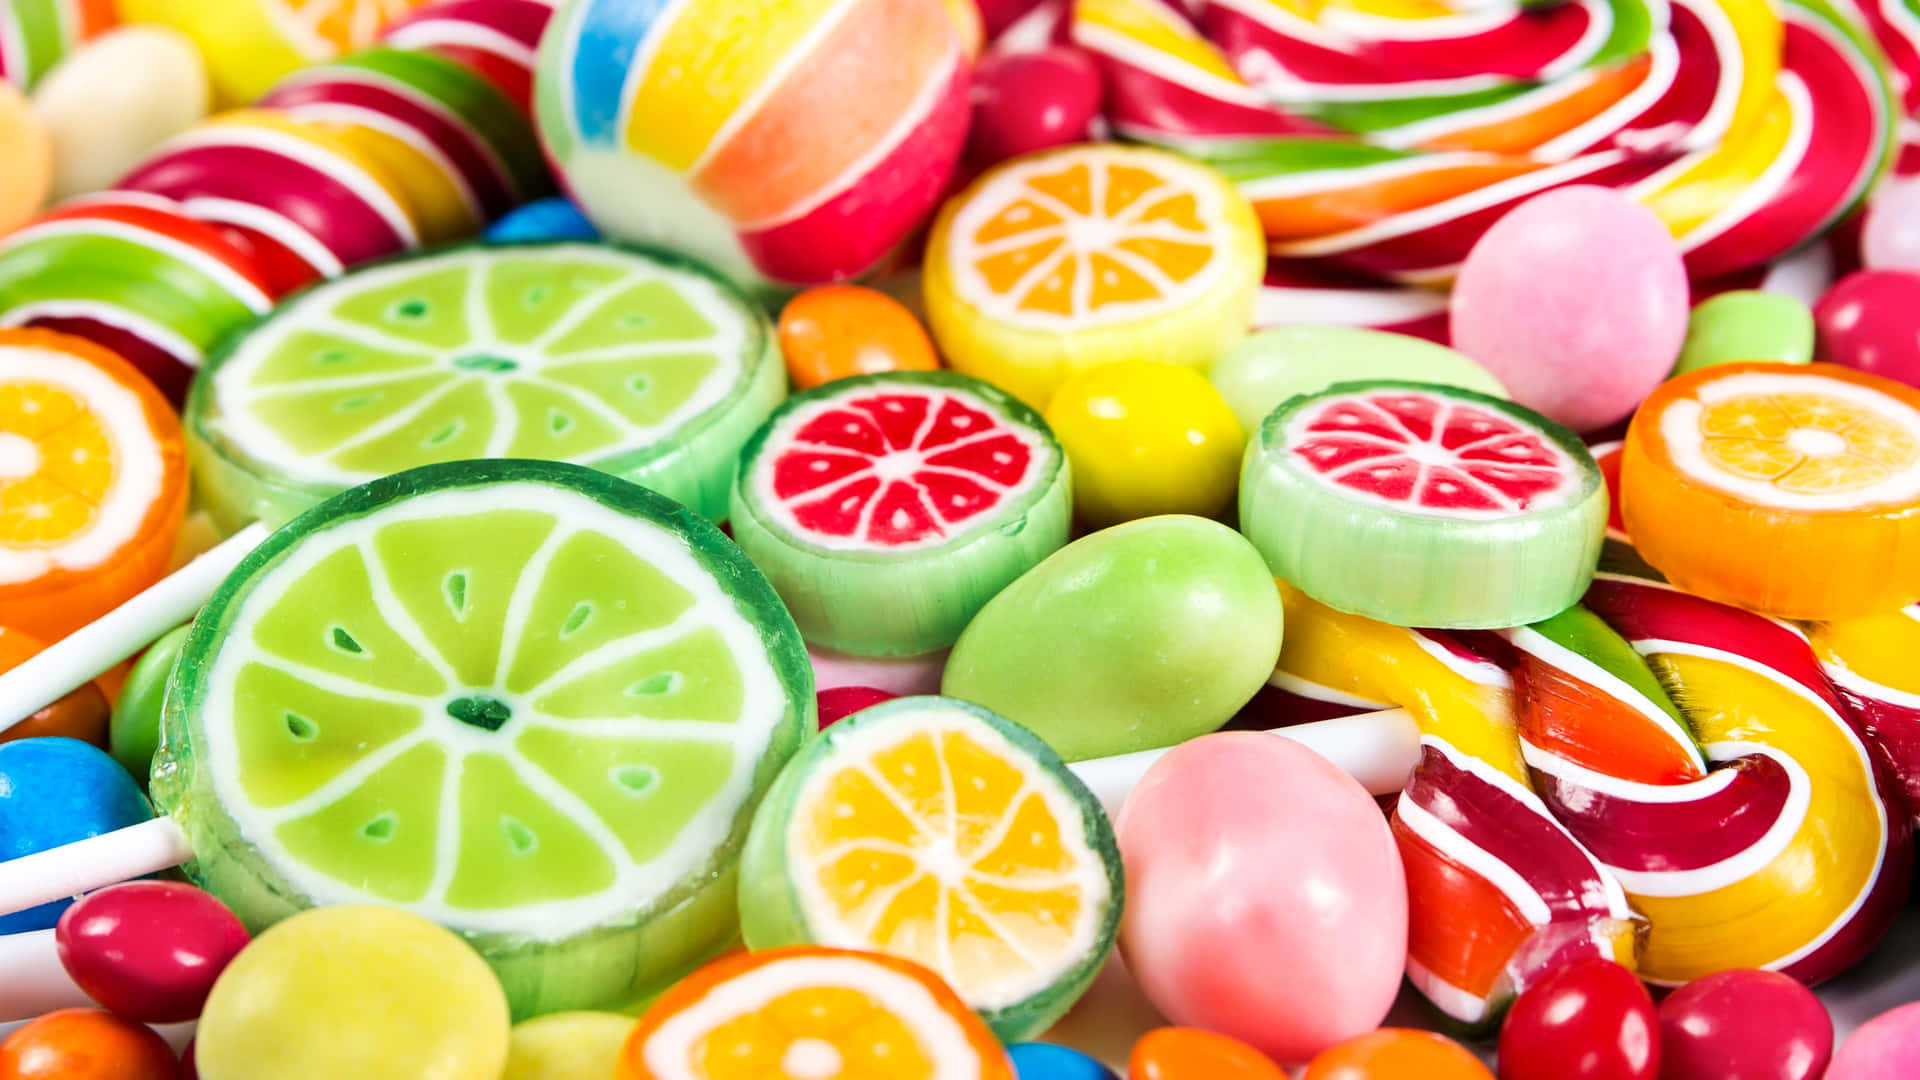 Enjoy the sweet taste of a delicious candy!